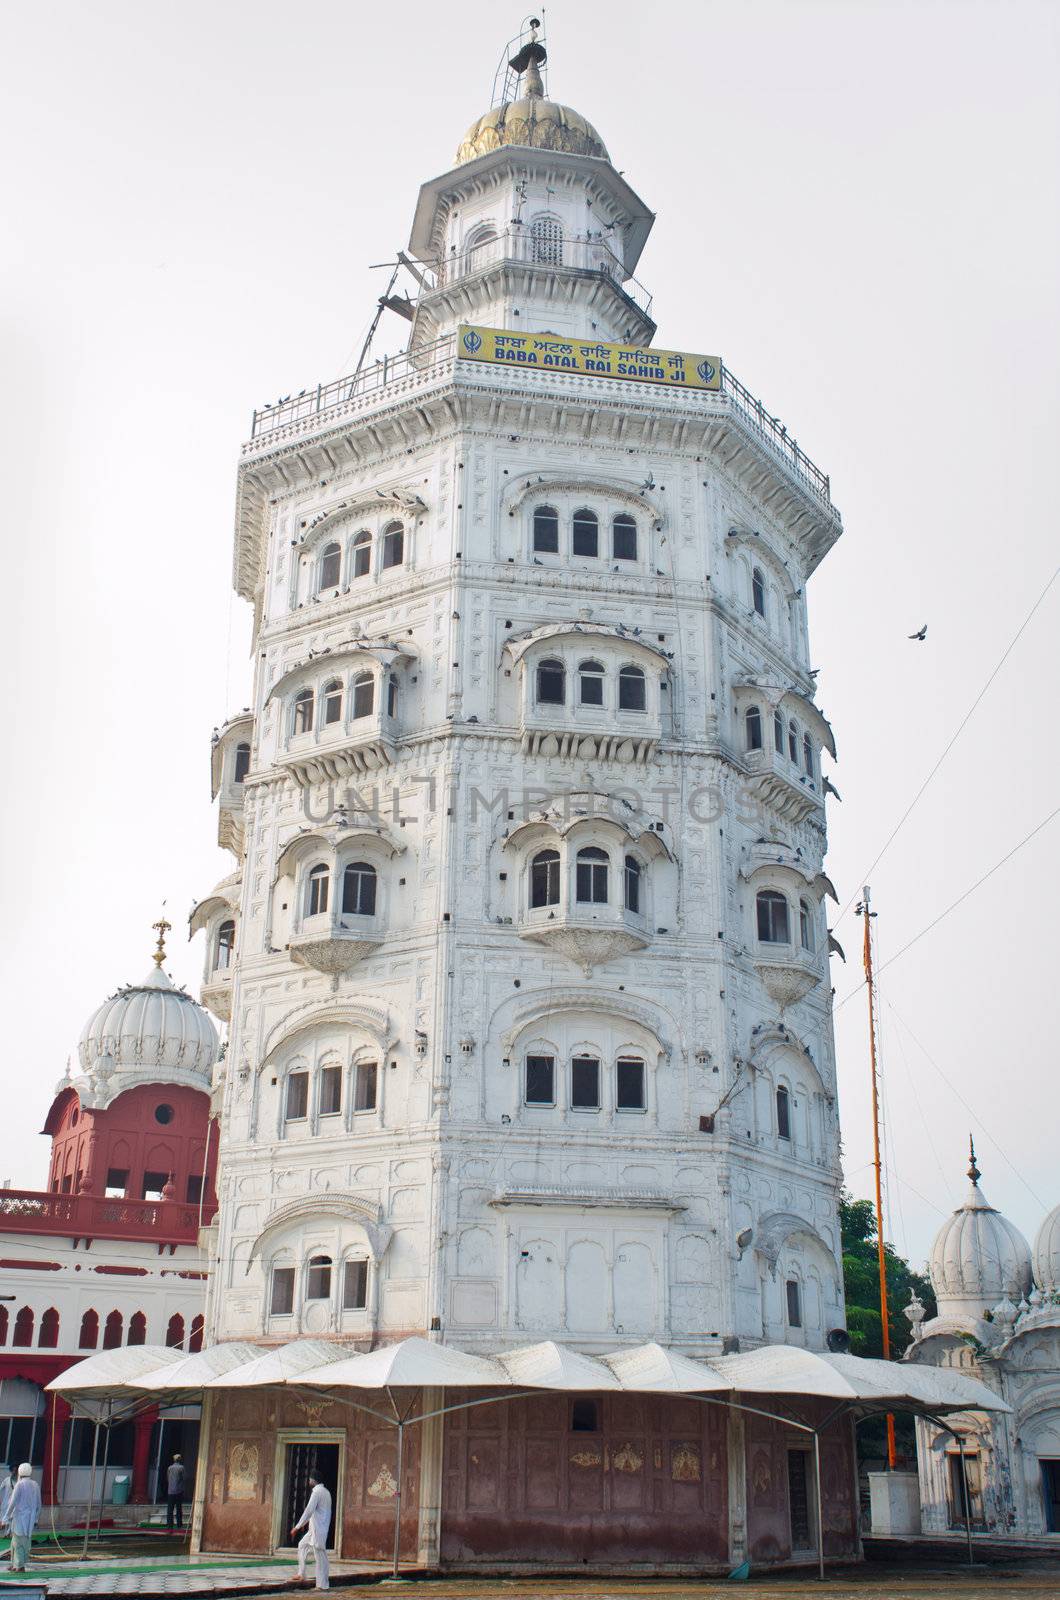 Gurdwara Baba Atal Sahib is the nine-storey octagonal tower, 40 metres high, is the tallest building in Amritsar.  It is part of The Harmandir Sahib Complex, the spiritual and cultural center of the Sikh religion..